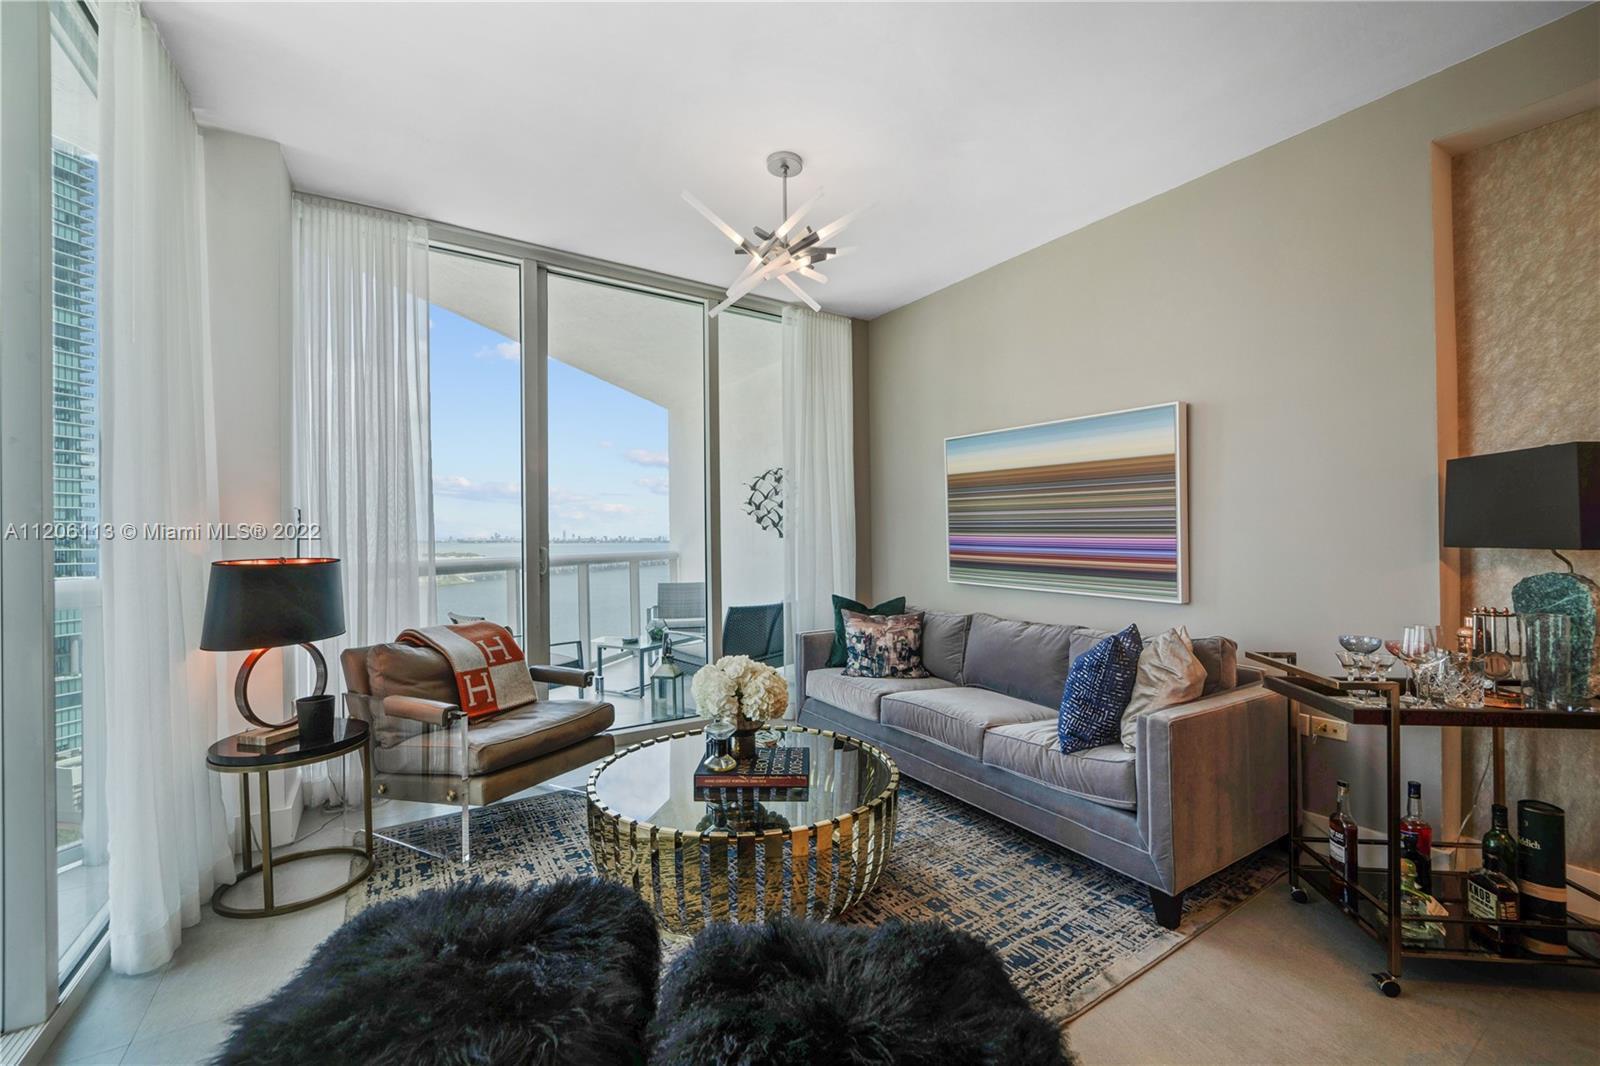 Sophisticated Unit in Edgewater East (Location!! Location!!). Wake up with Biscayne Bay views from e